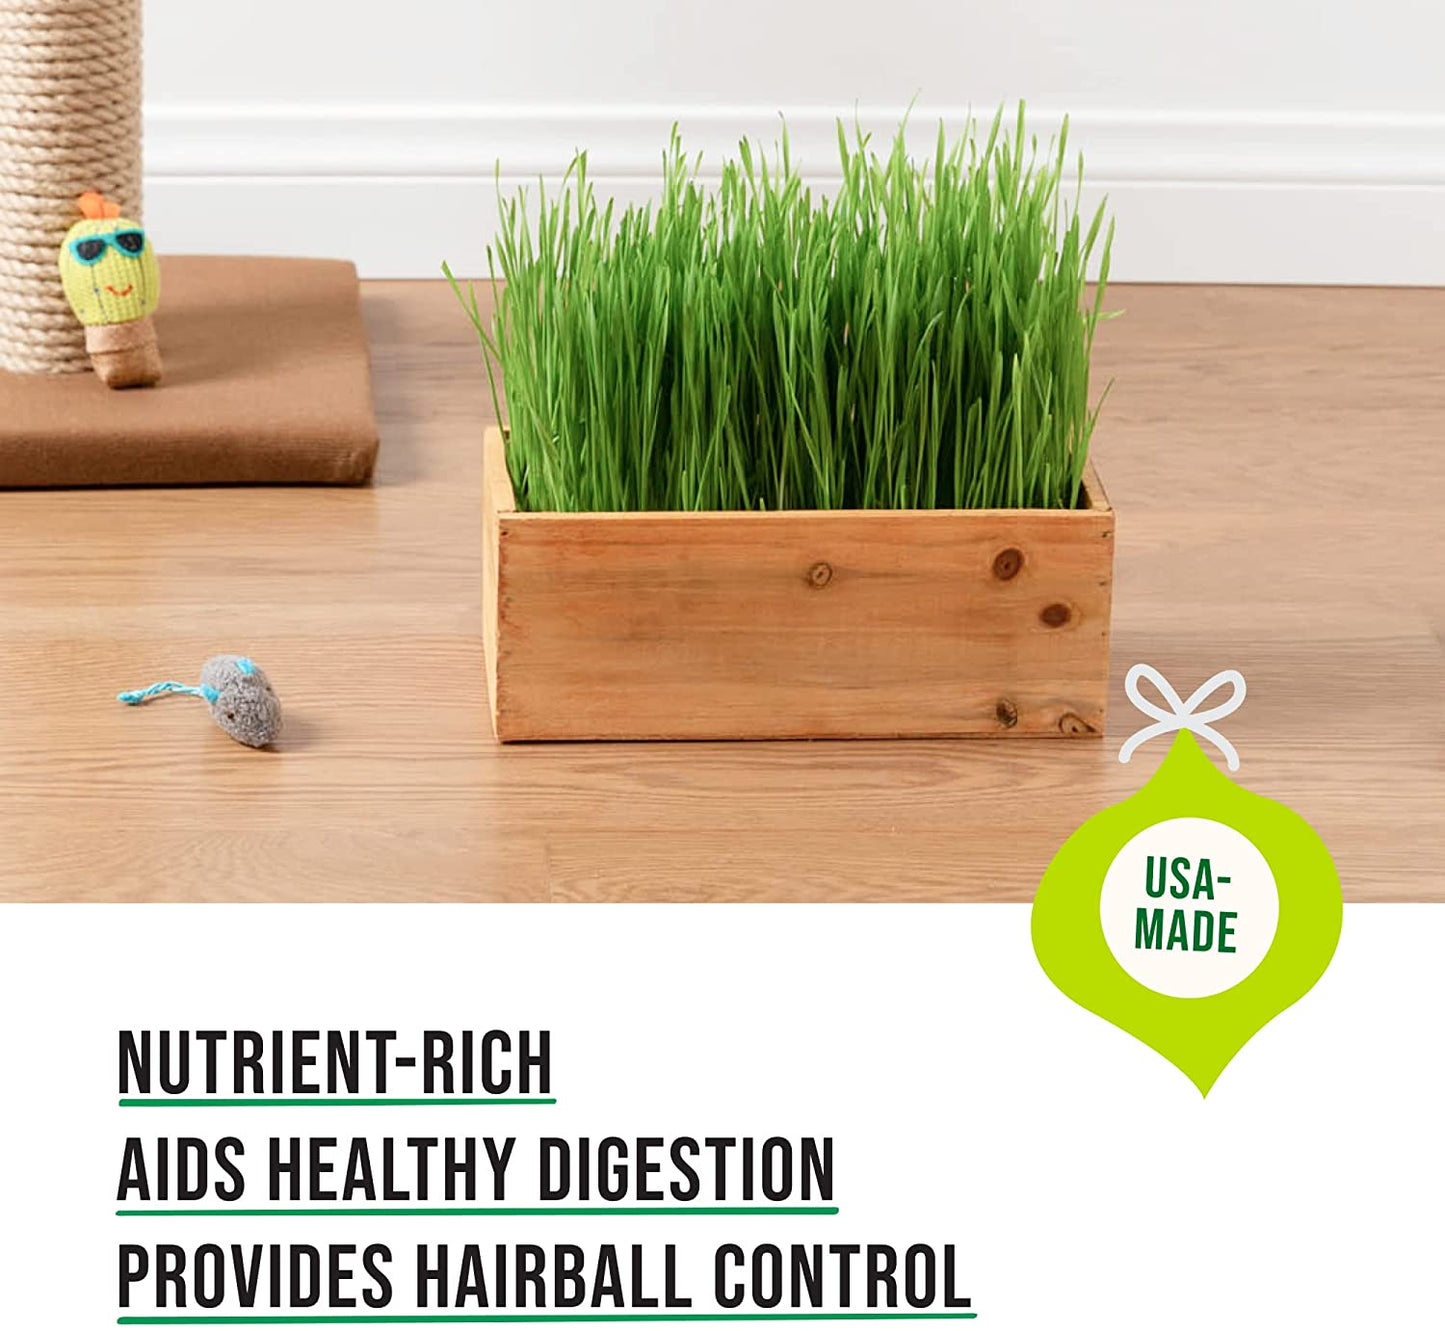 Cat Grass Growing Kit with Seeds (Organic) - Rustic Wood Planter